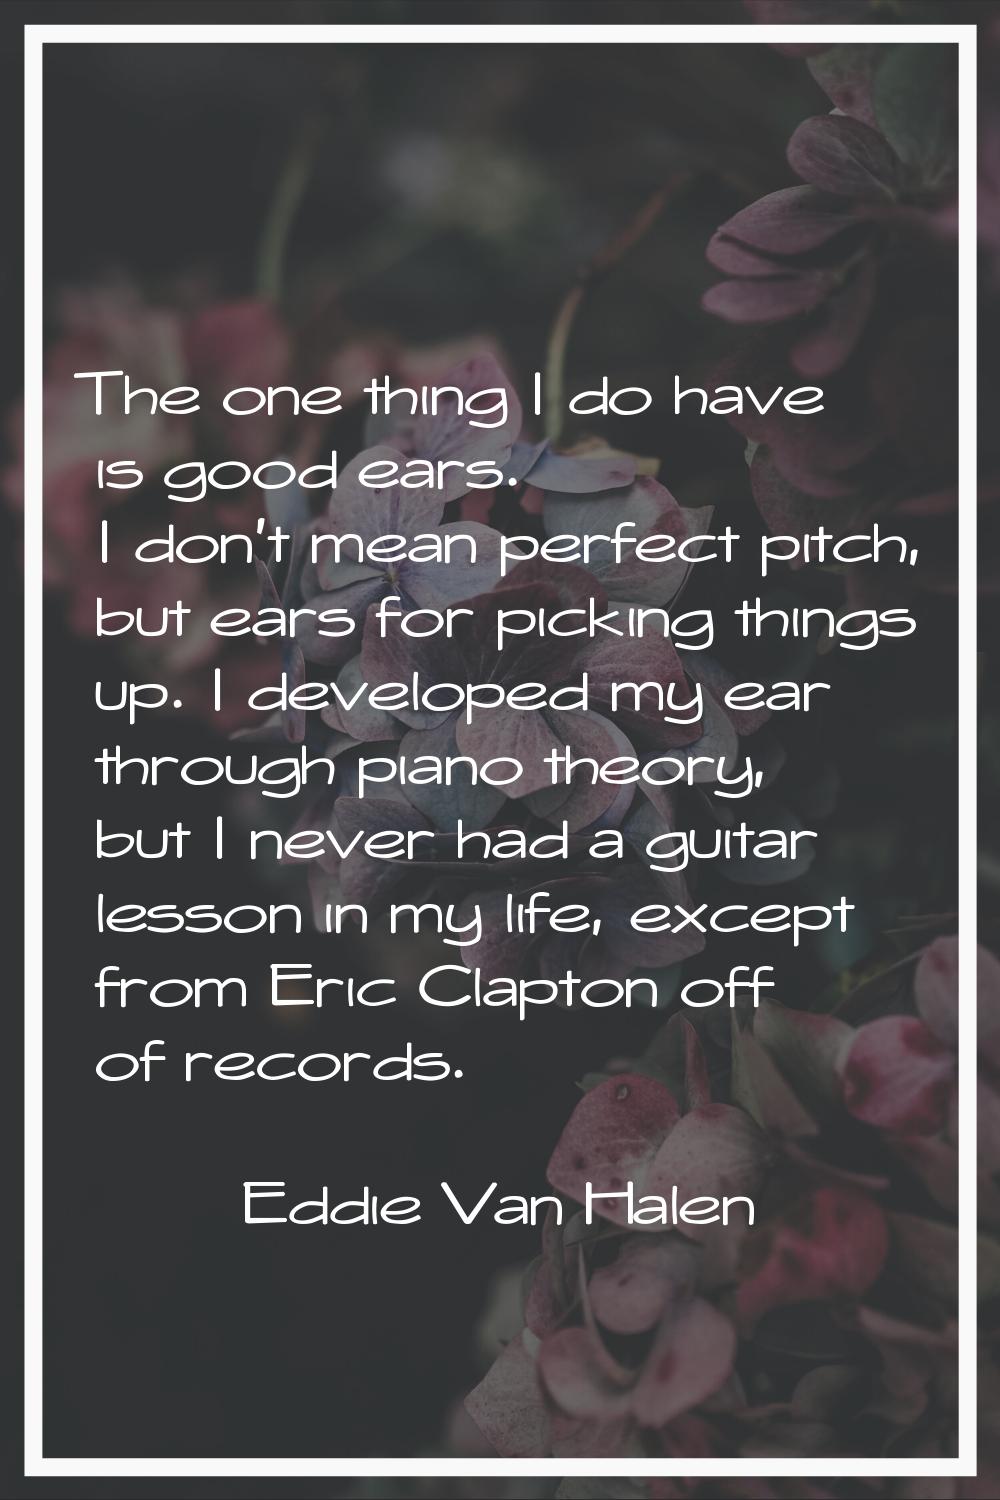 The one thing I do have is good ears. I don't mean perfect pitch, but ears for picking things up. I